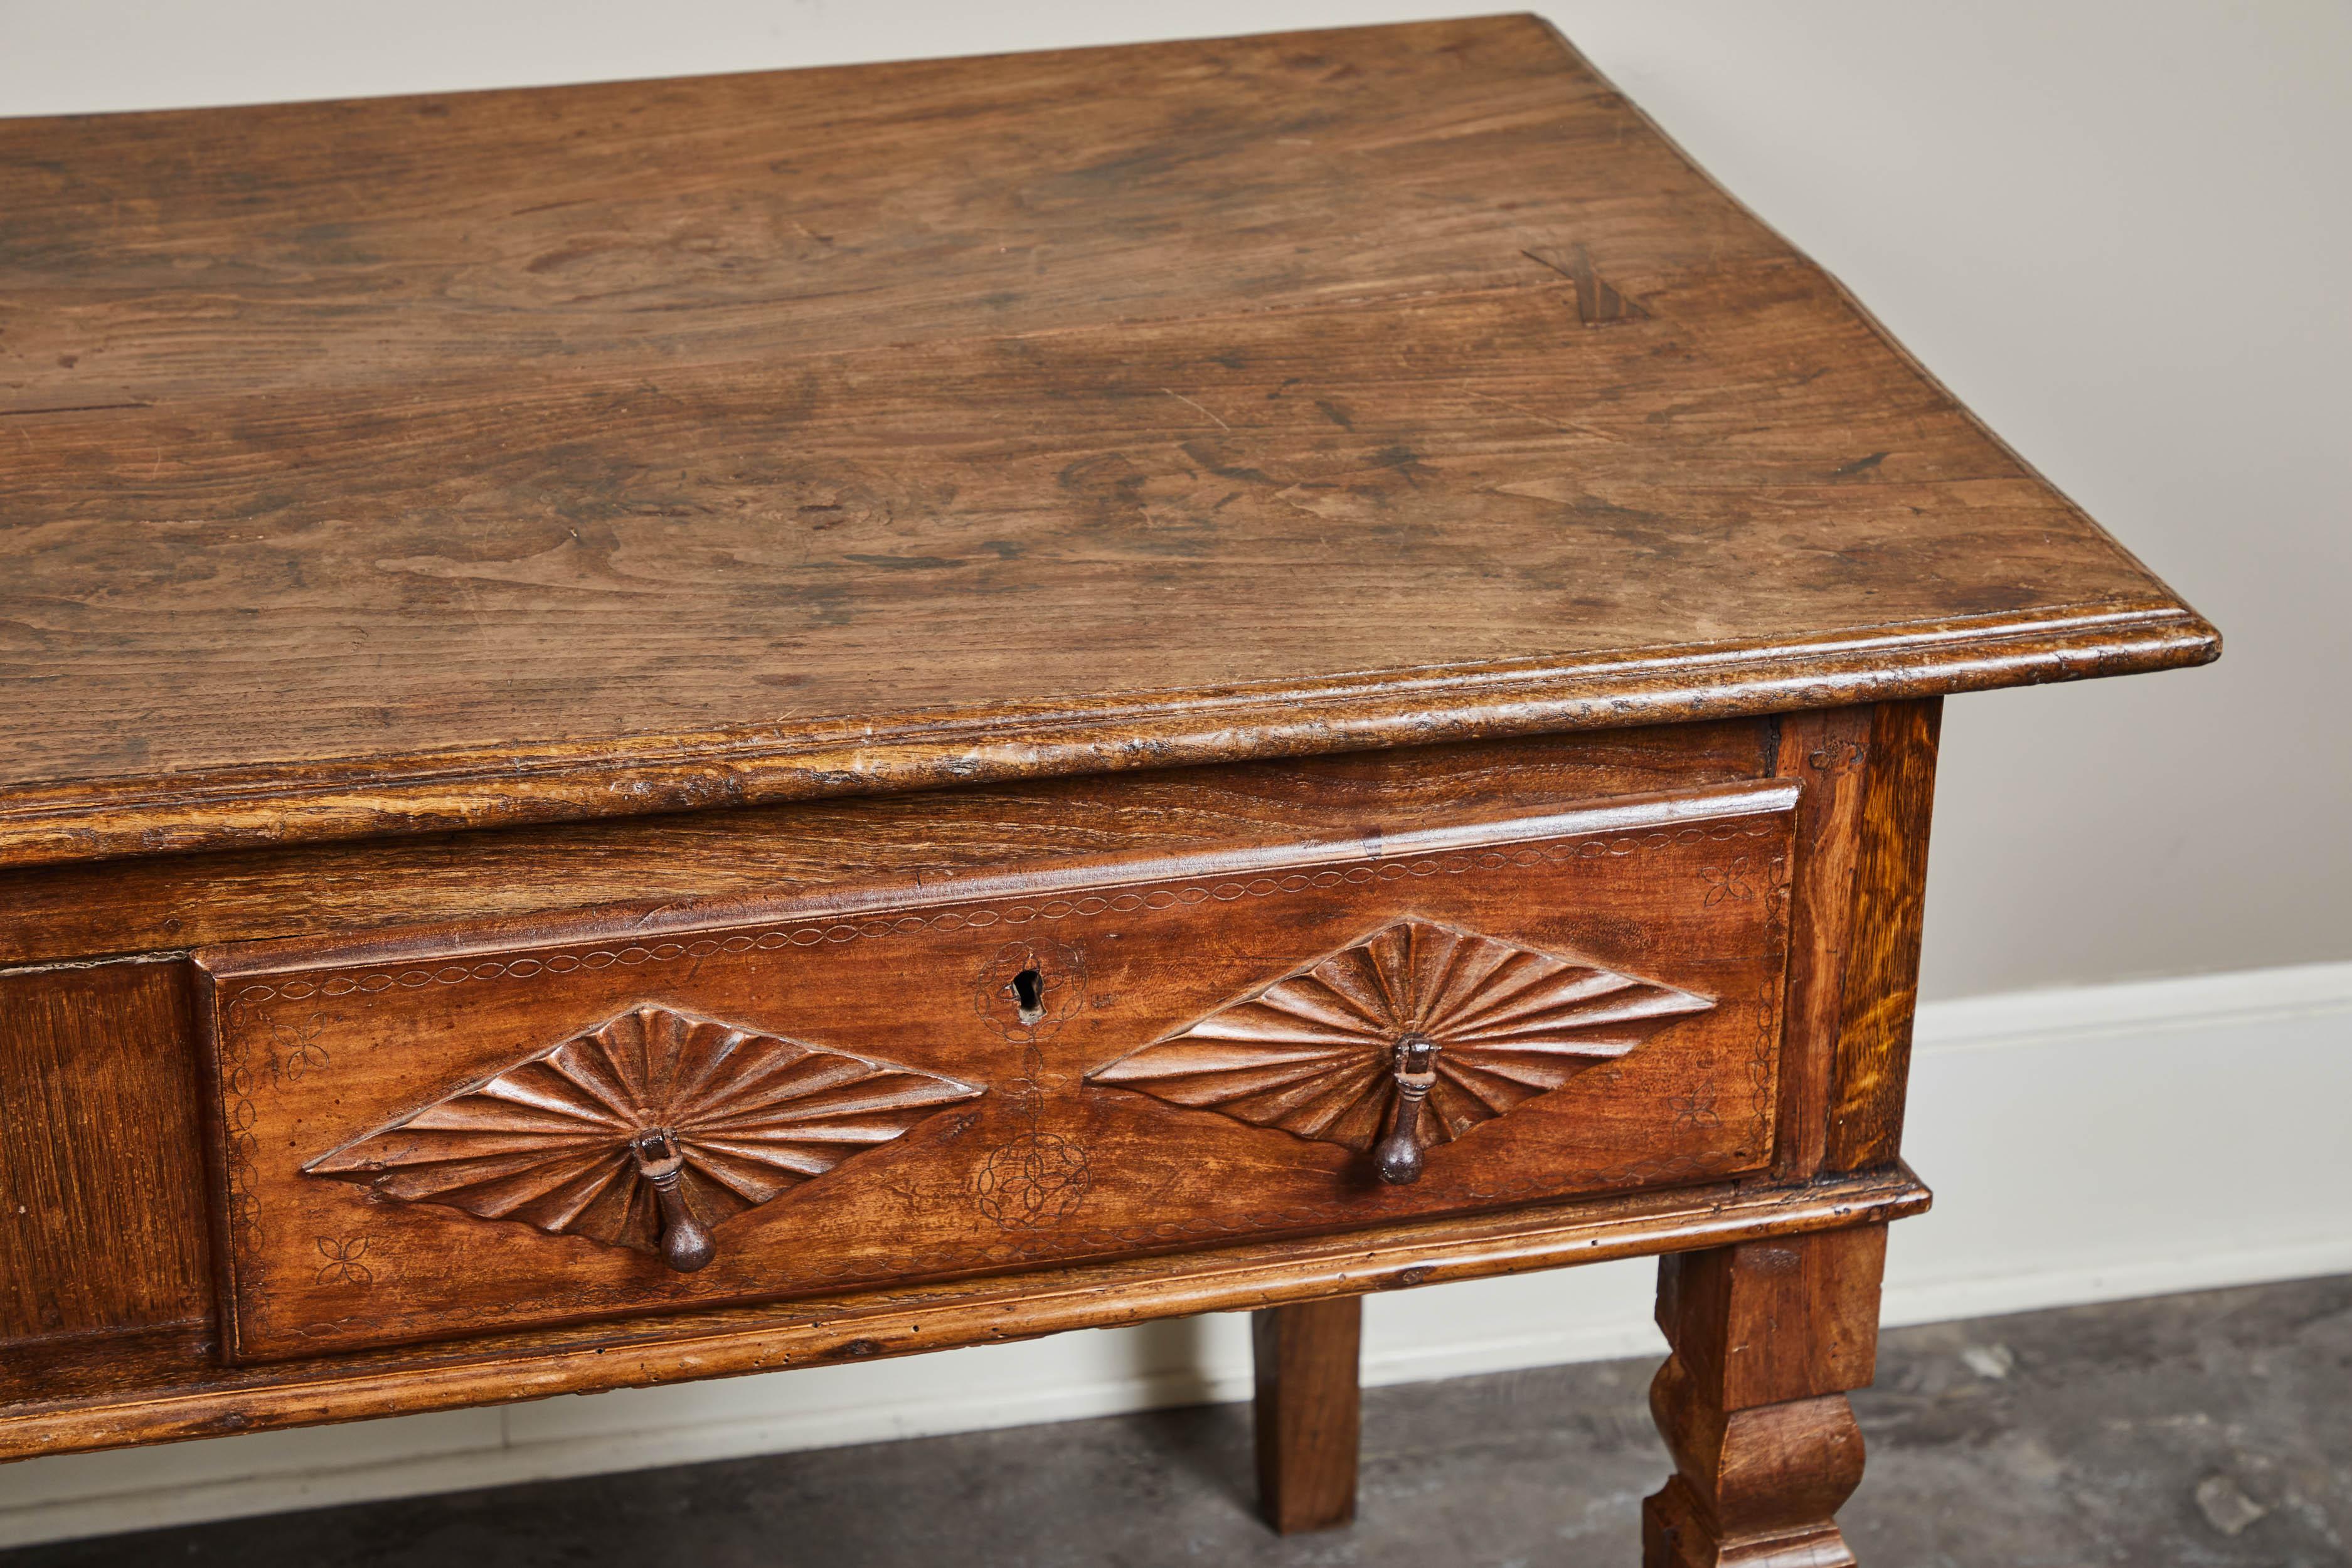 A handsome 18th century Portuguese 2-drawer table featuring highly decorated drawers. Each drawer features an engraved geometric pattern as well as diamond shapes.